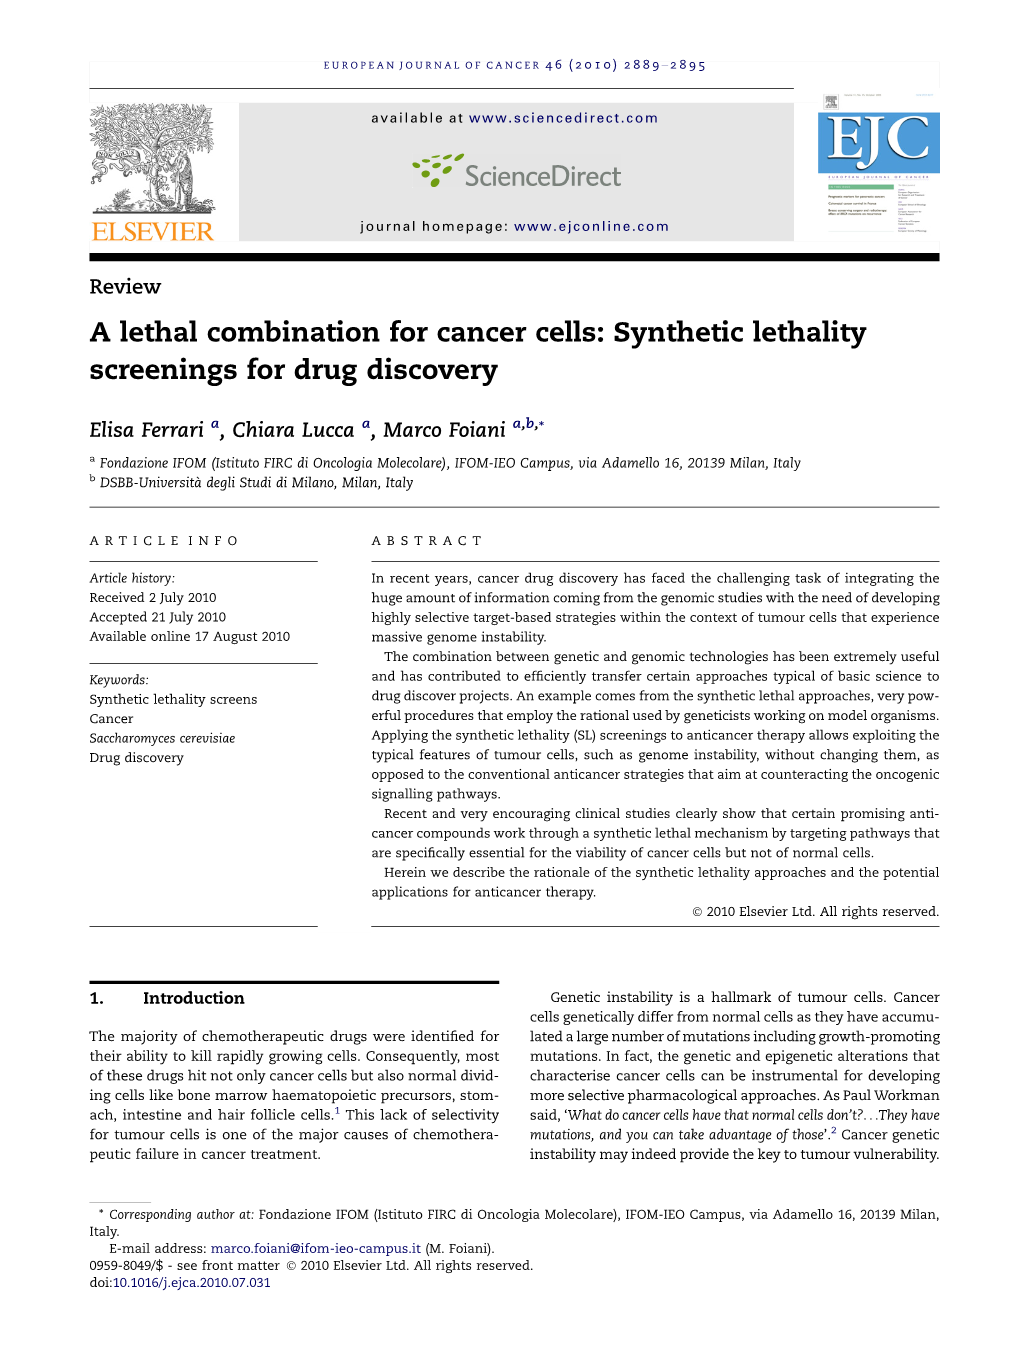 Synthetic Lethality Screenings for Drug Discovery